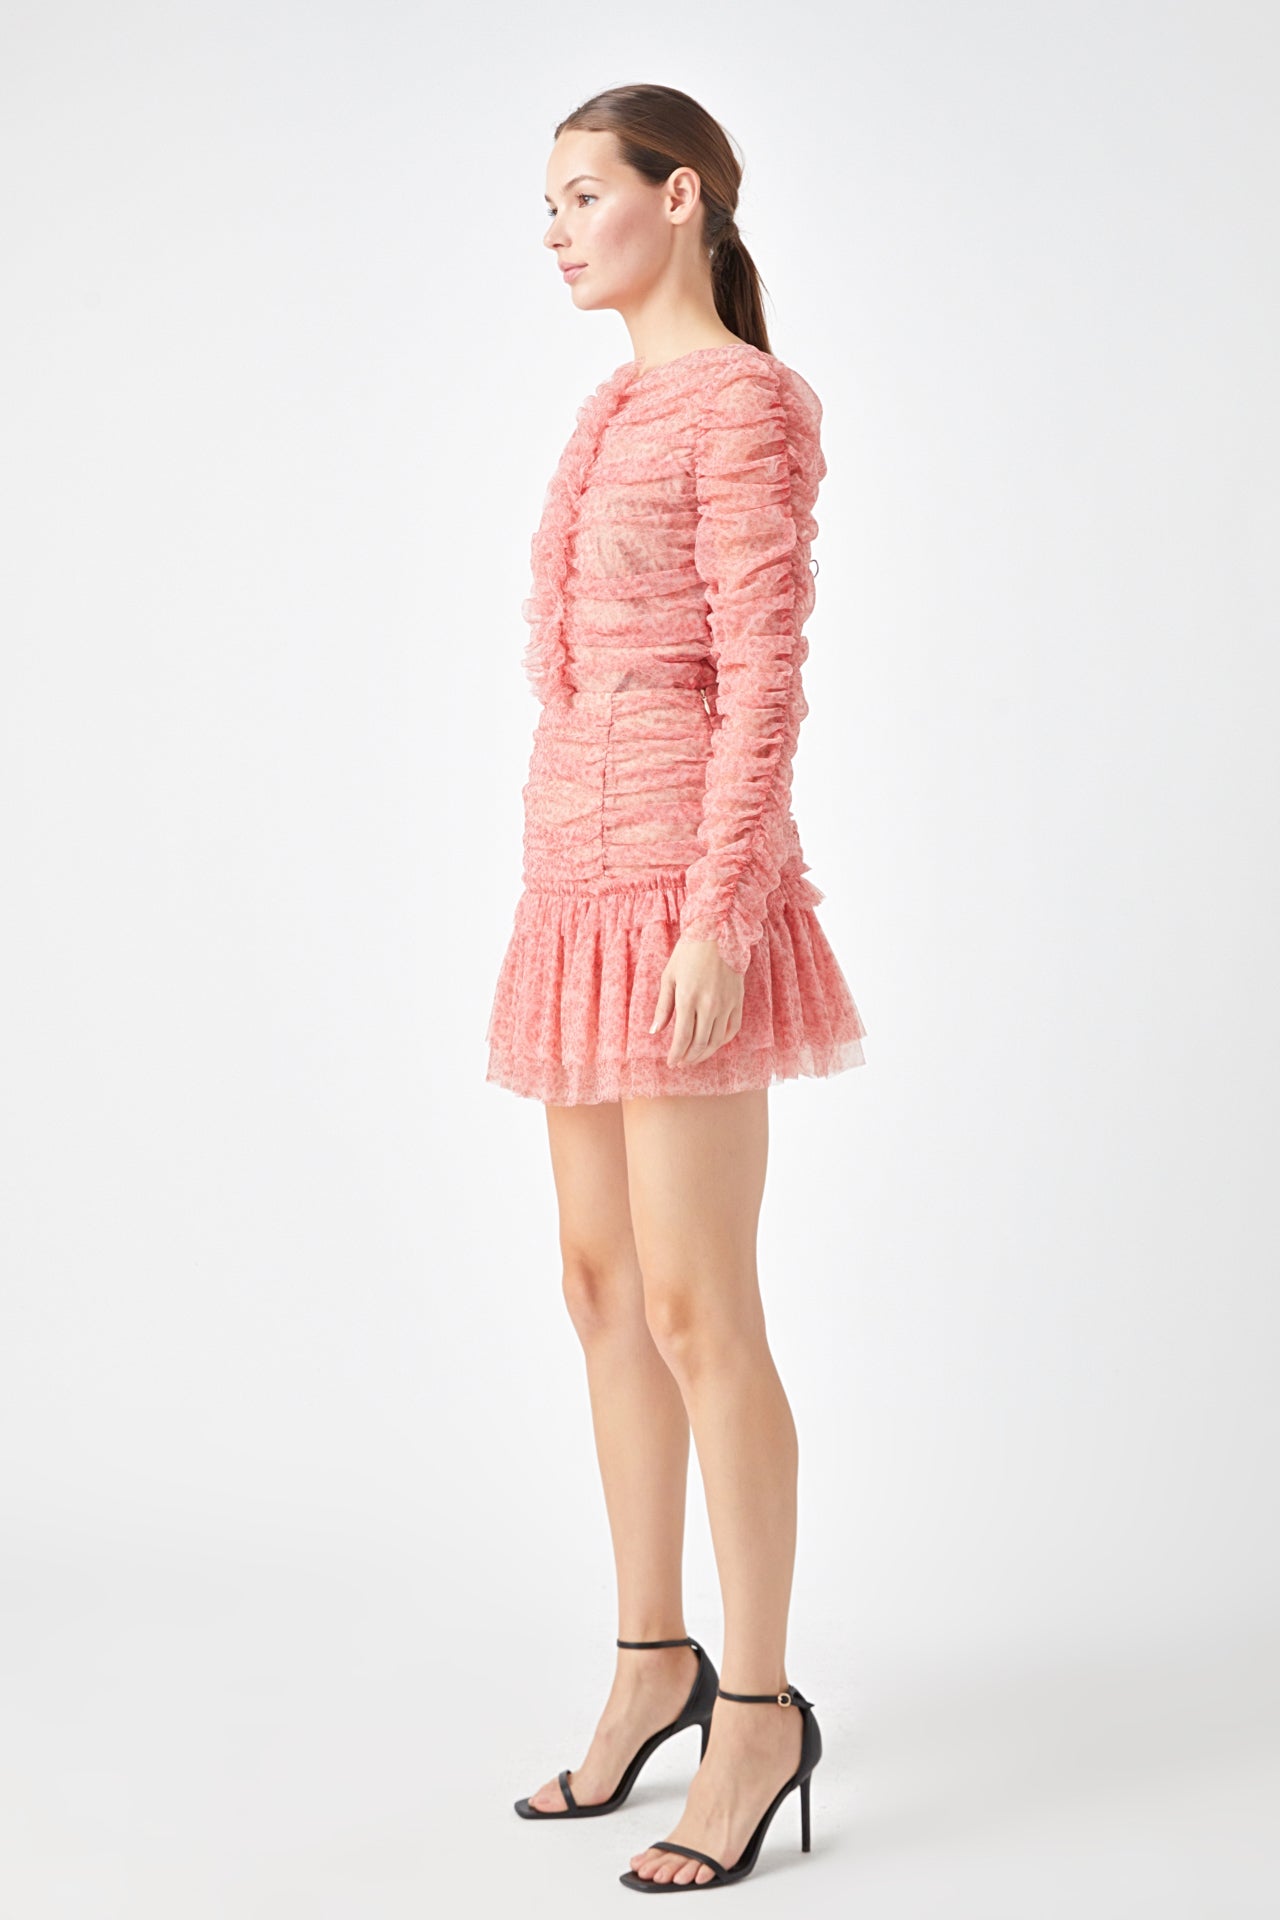 ENDLESS ROSE - Shirred Floral Mesh Skirt - SKIRTS available at Objectrare